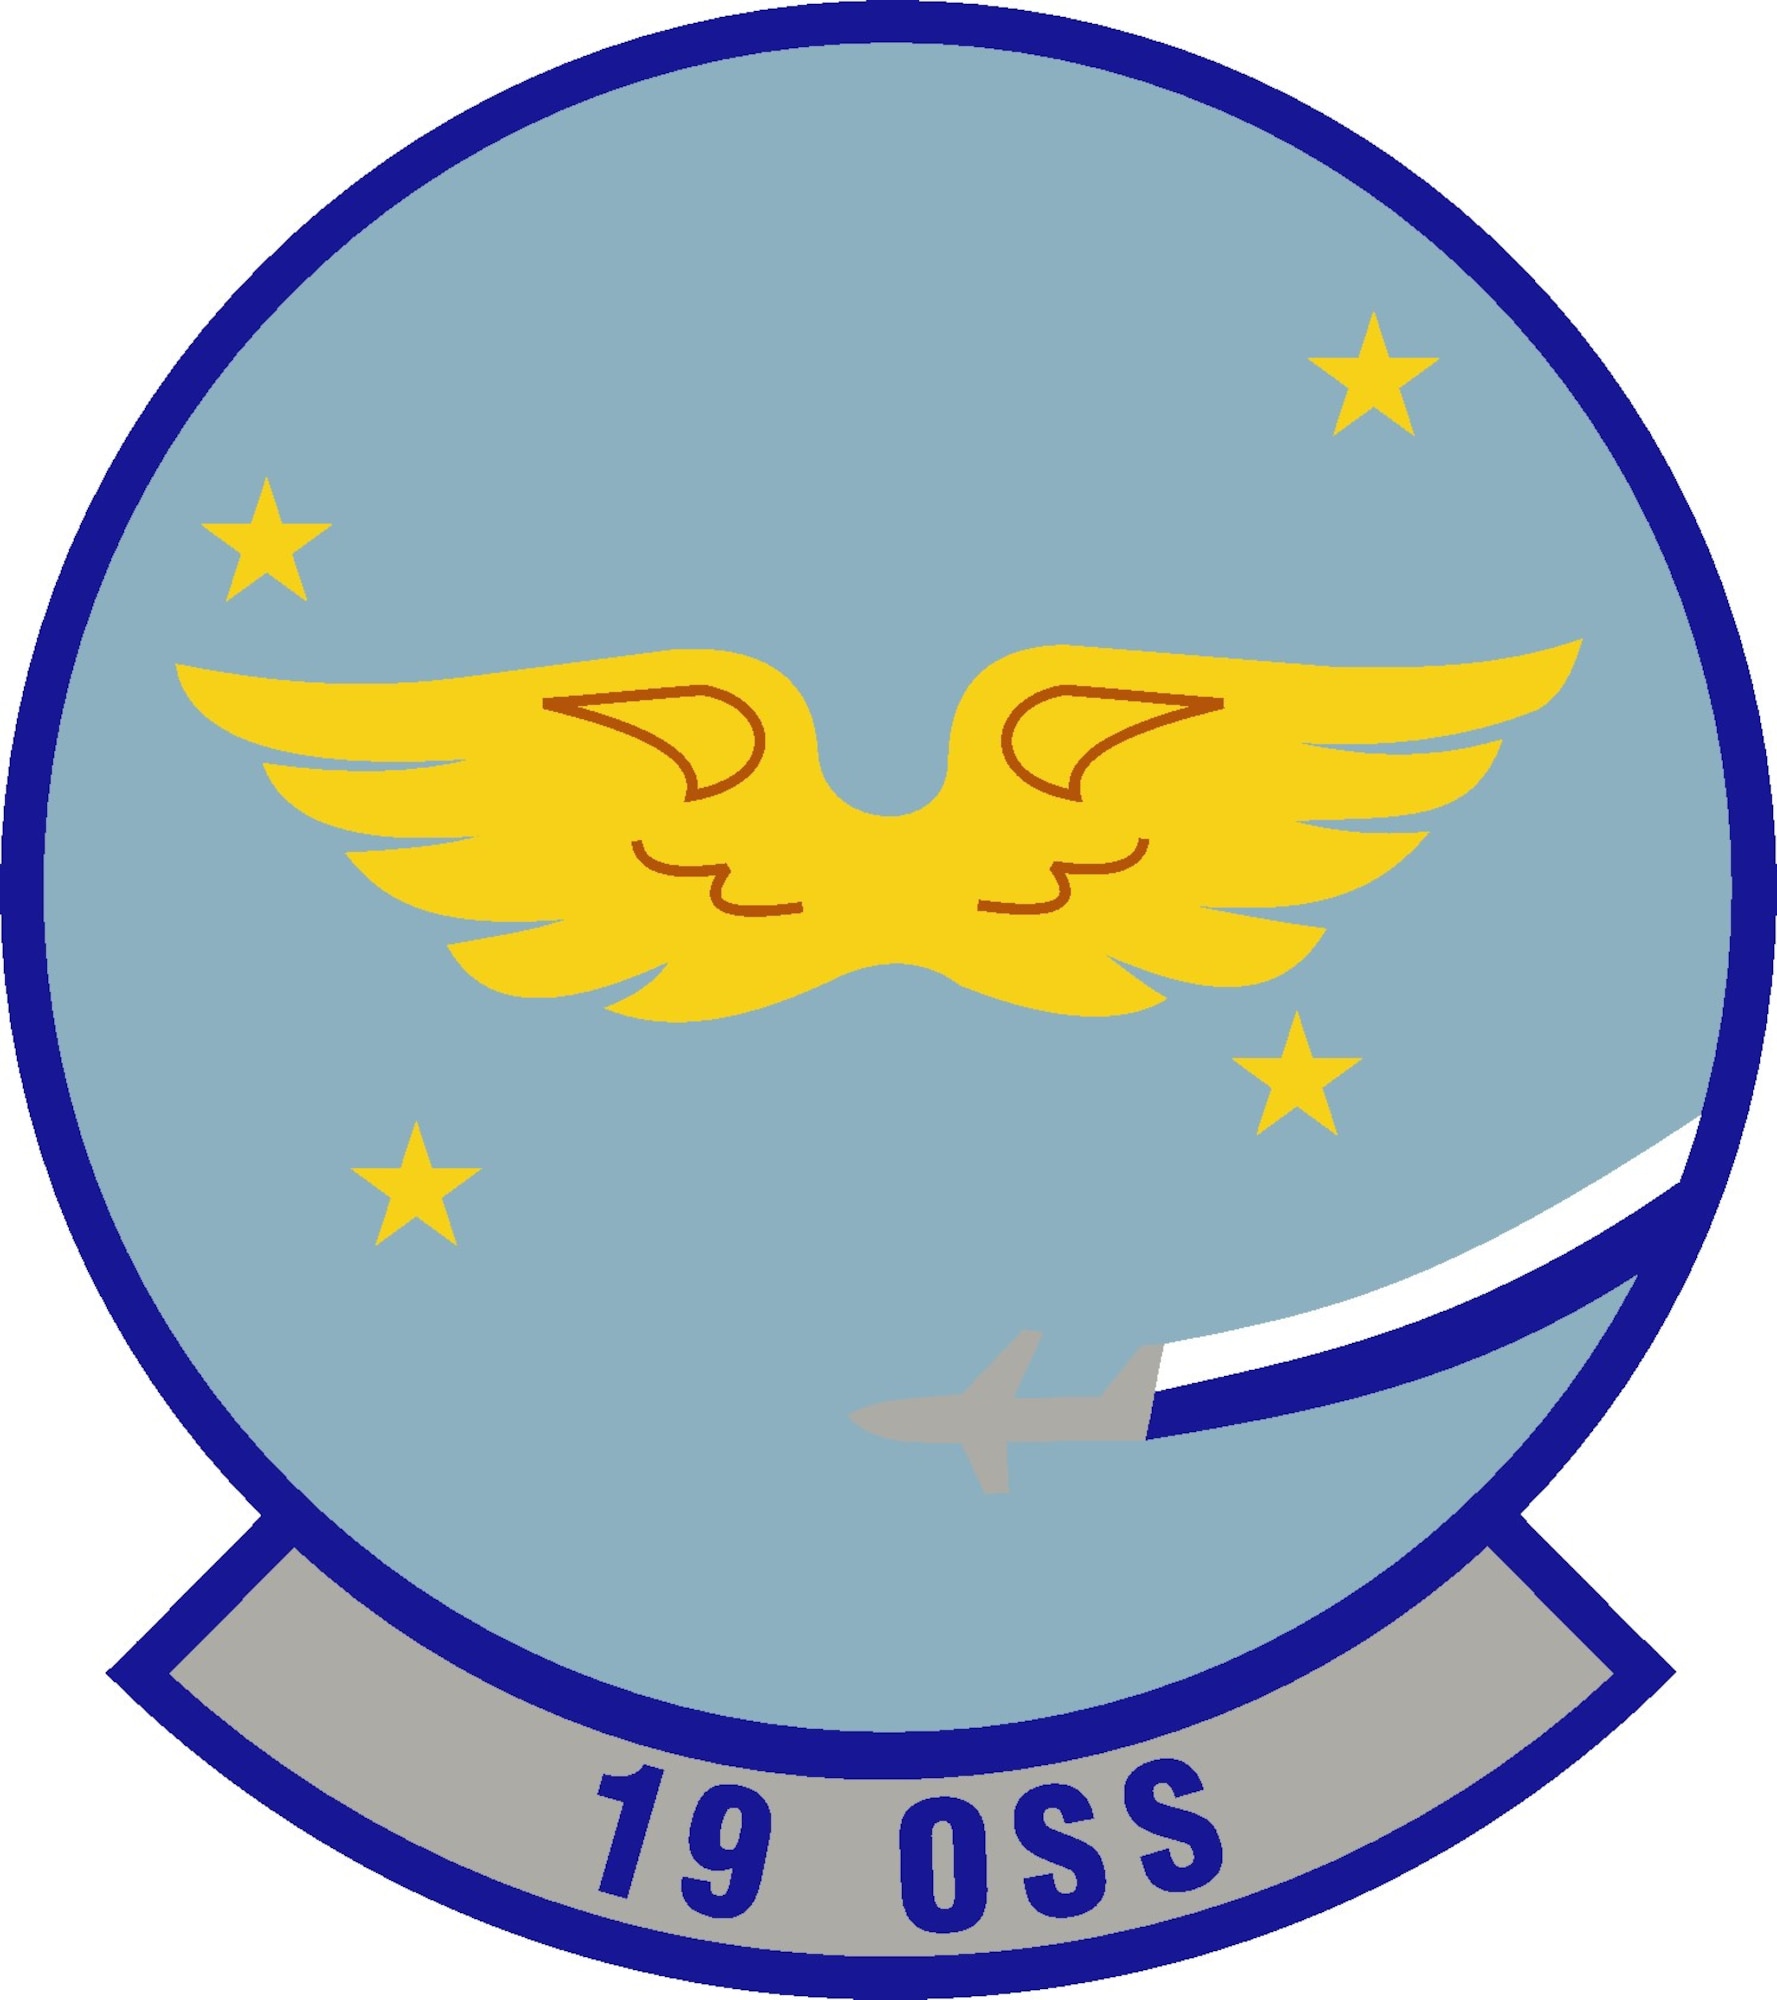 Happy birthday 19th Operations Support Squadron. The 19th OSS originally activated as the 19th Airdrome Squadron at Bowman Field, Louisville, Kentucky, on January 4, 1943.  During World War II, an airdrome squadron was a barebones airfield operations unit, capable of running a new or small airfield in the absence of the kind of larger service establishment that would be associated with one or more combat or training groups. As such, they were generally short-lived units cobbled together for specific missions.